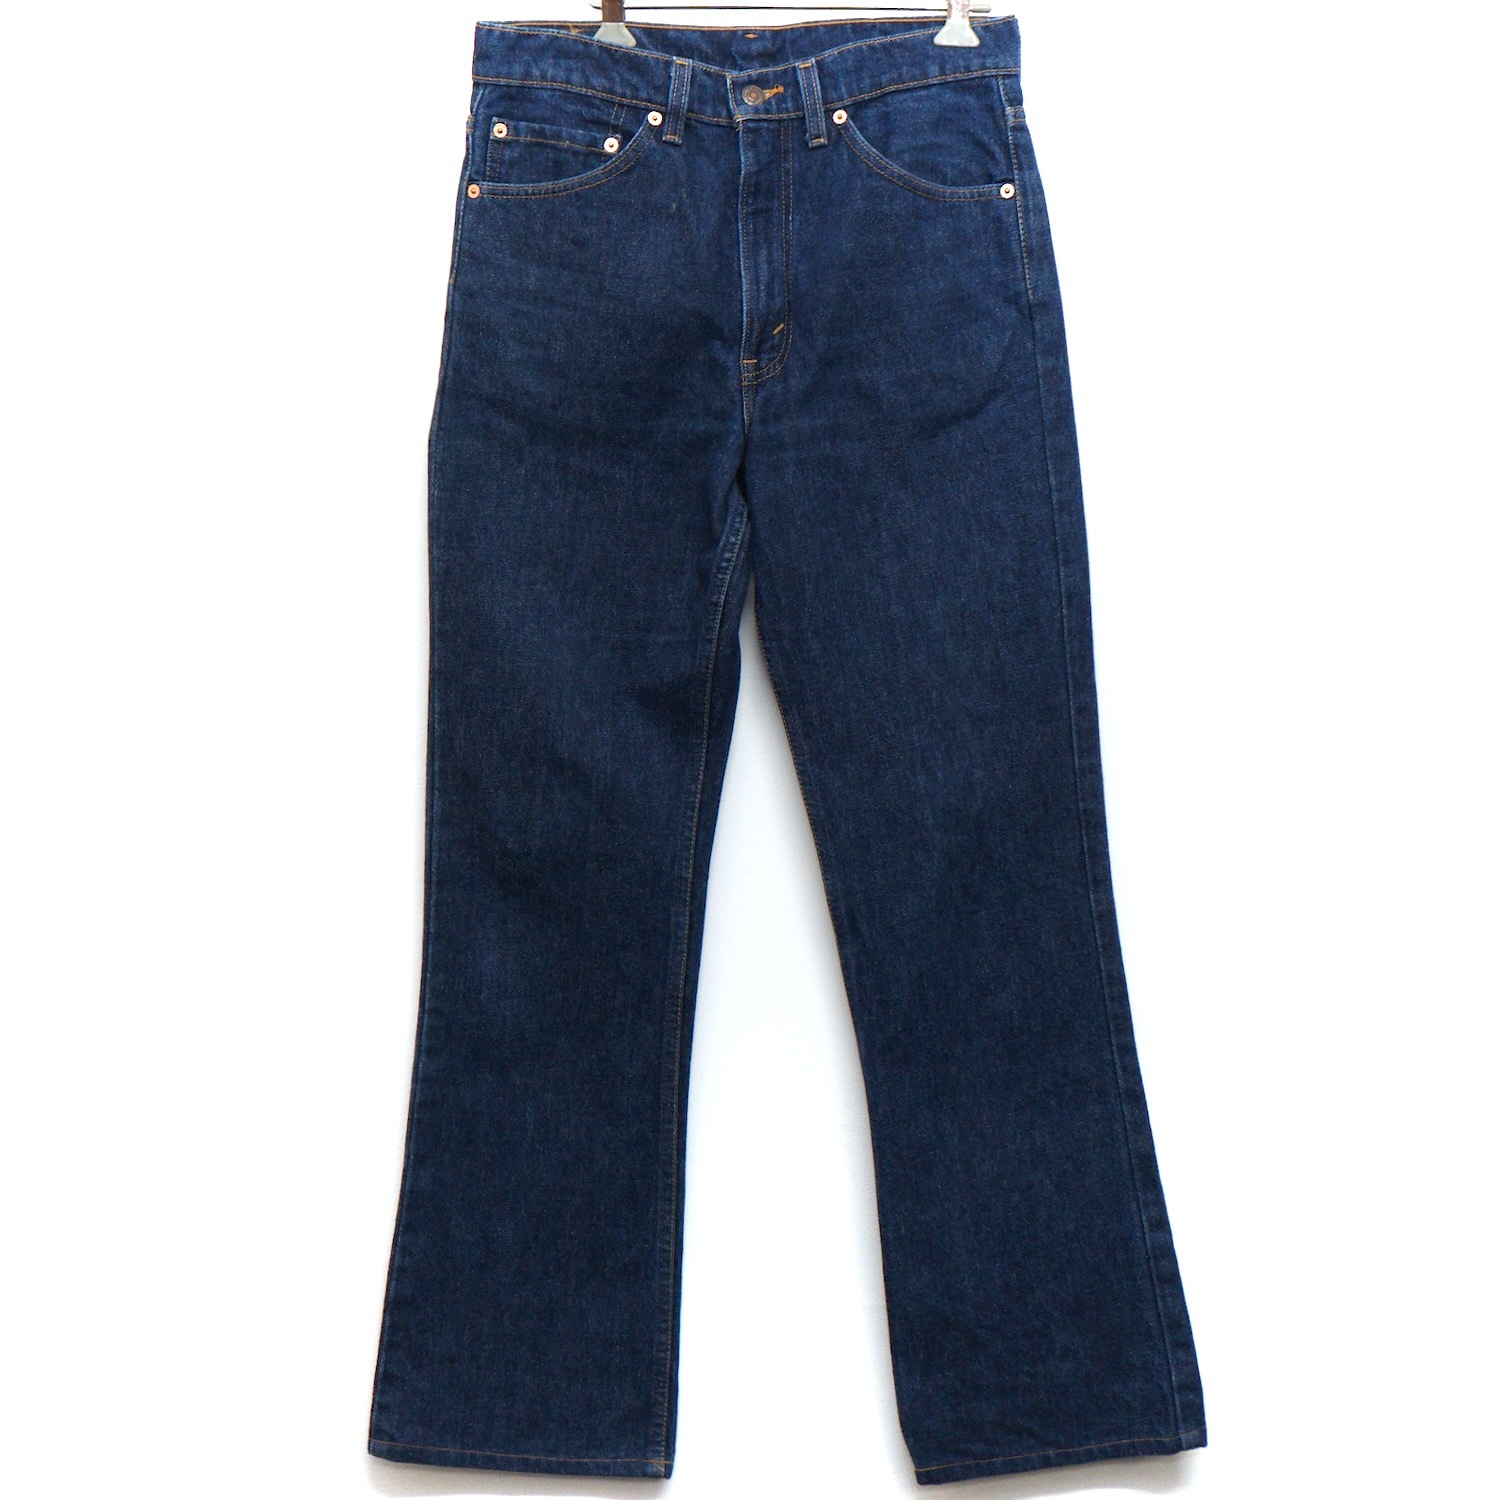 2788 Levi's リーバイス 517 96年 米国製 Made in U.S.A. ブーツカット